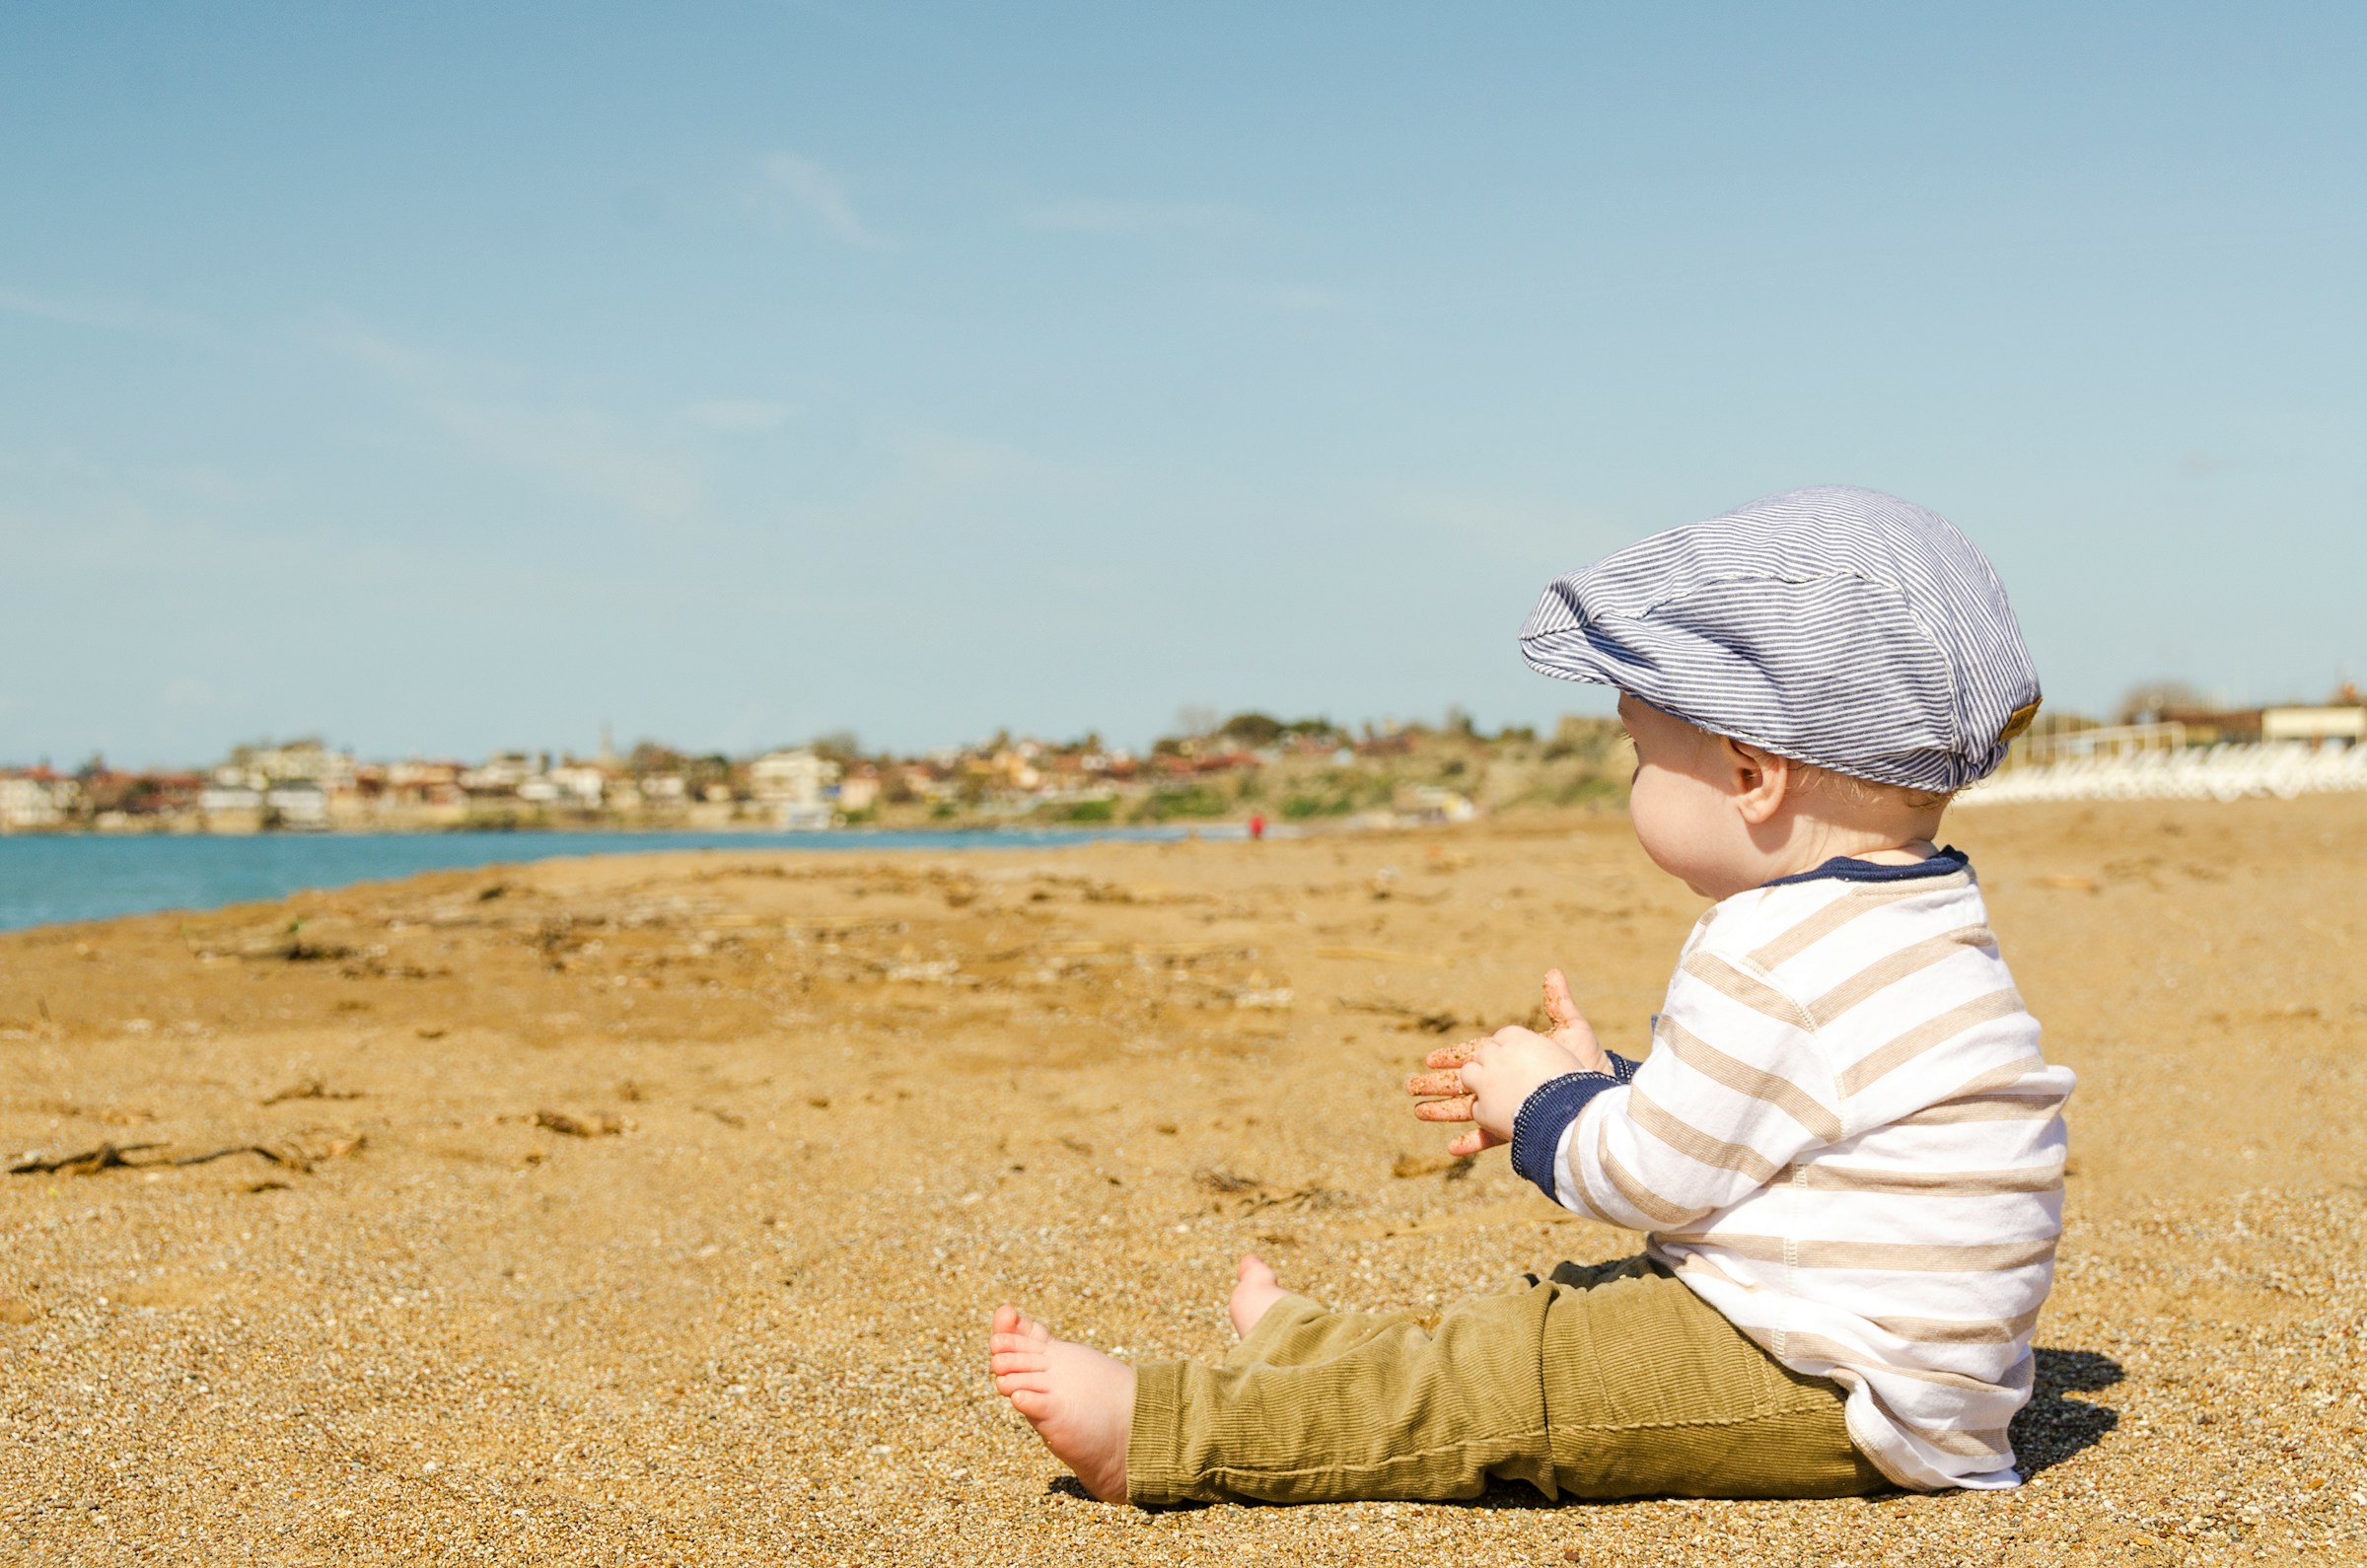 A baby boy sitting at the beach | Source: Pexels